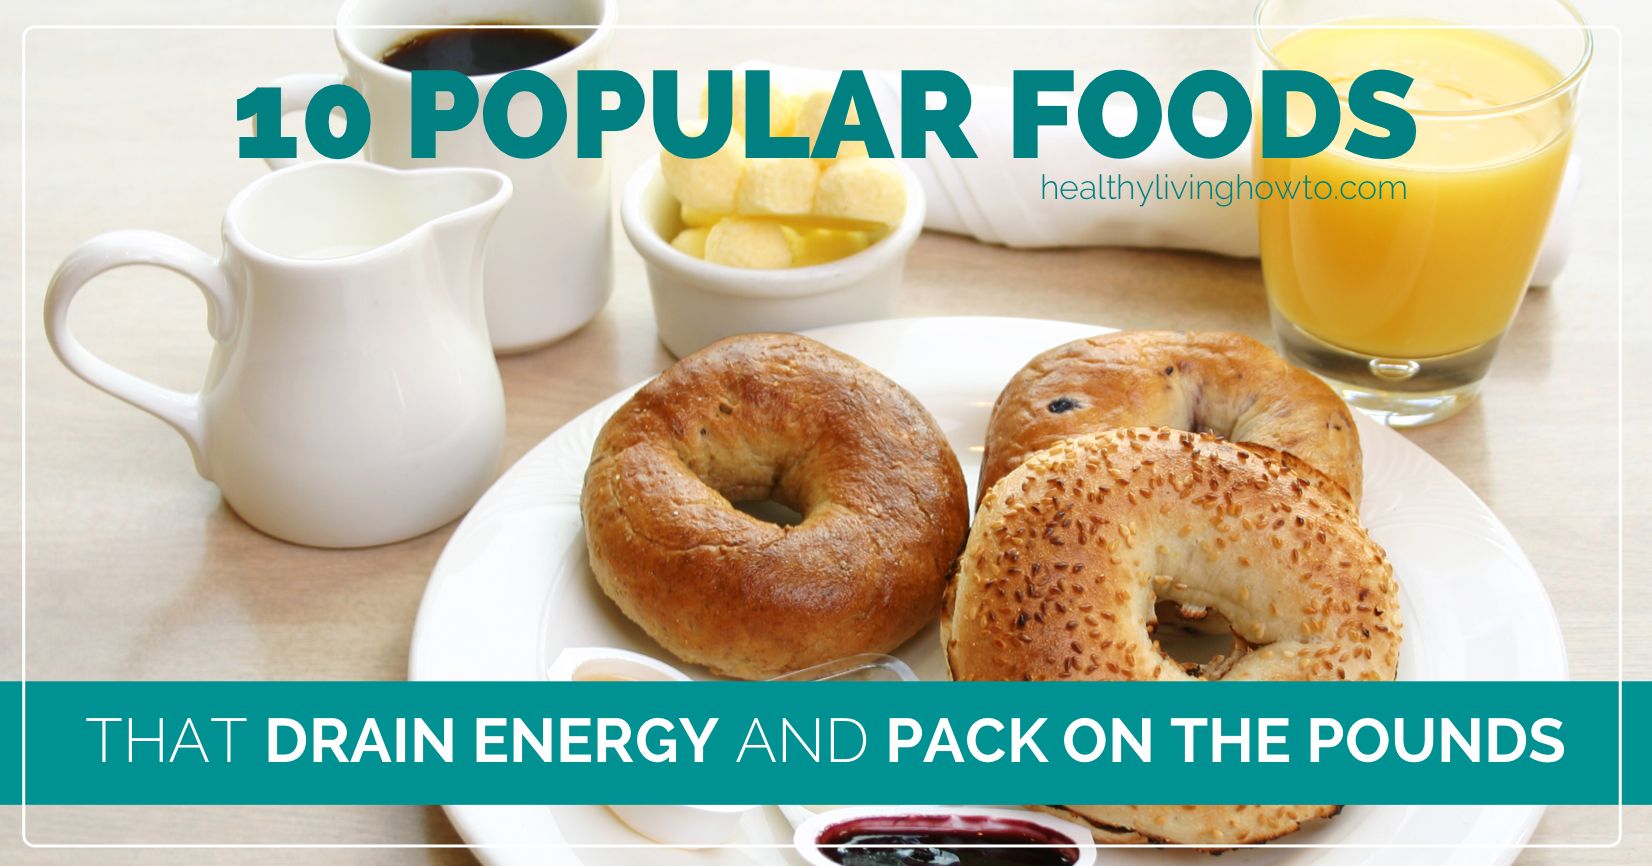 10 Popular Foods That Drain Energy & Pack On The Pounds | healthylivinghowto.com